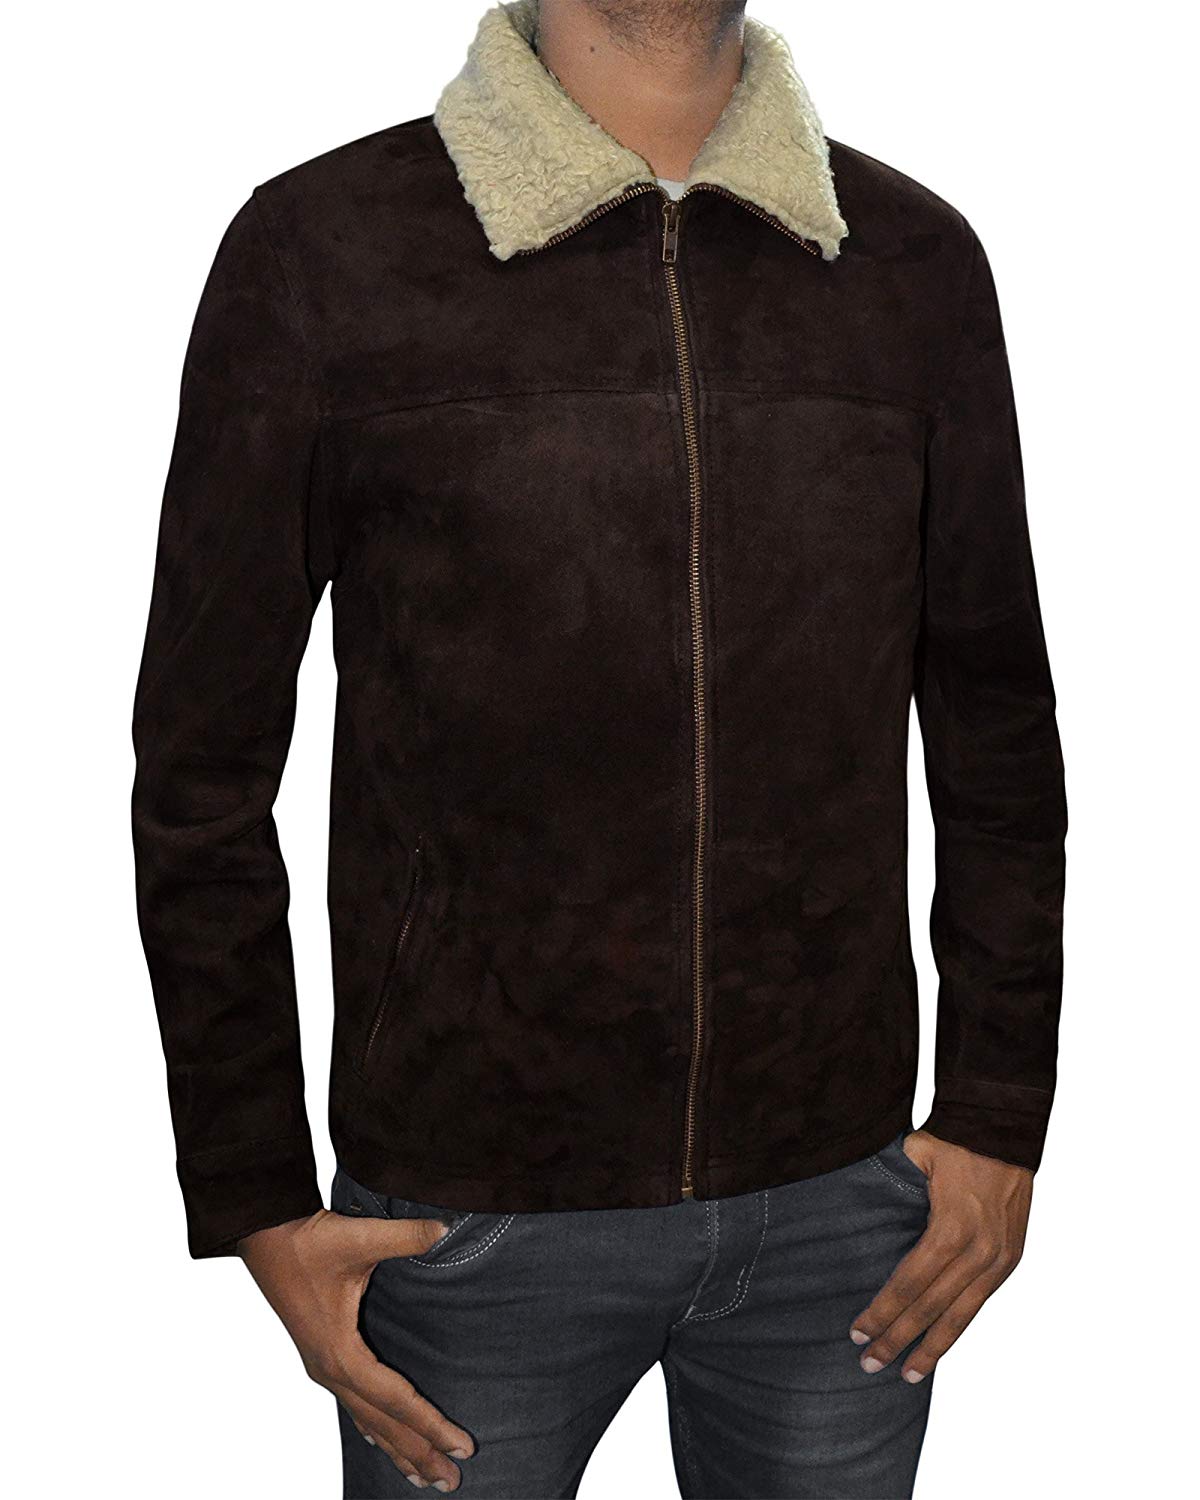 The Walking Dead Rick Grimes Brown Suede Leather Jacket1